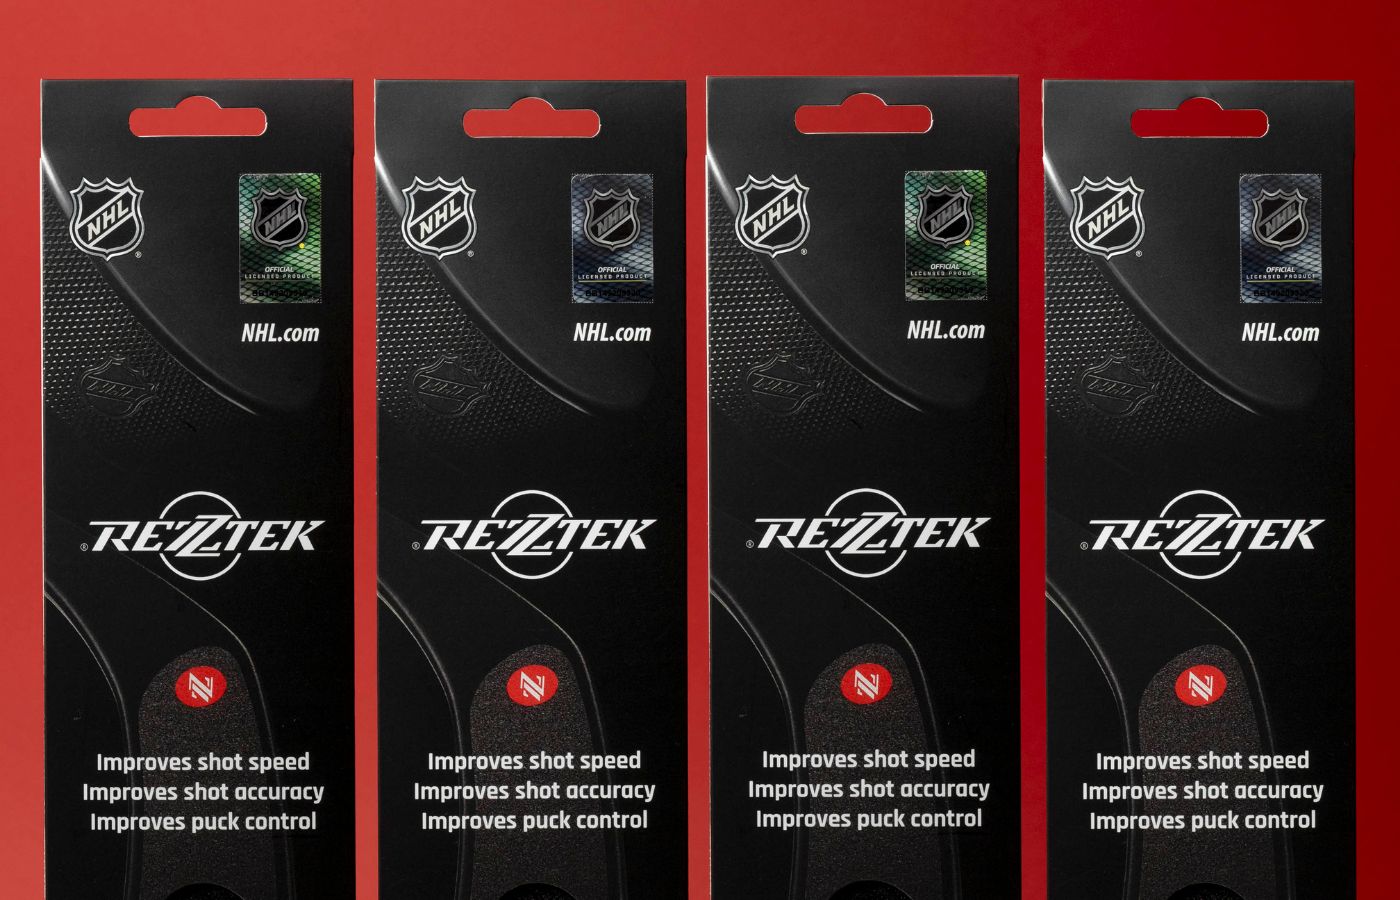 Rezztek® Becomes an Officially Licensed NHL product for the 2023-24 Season